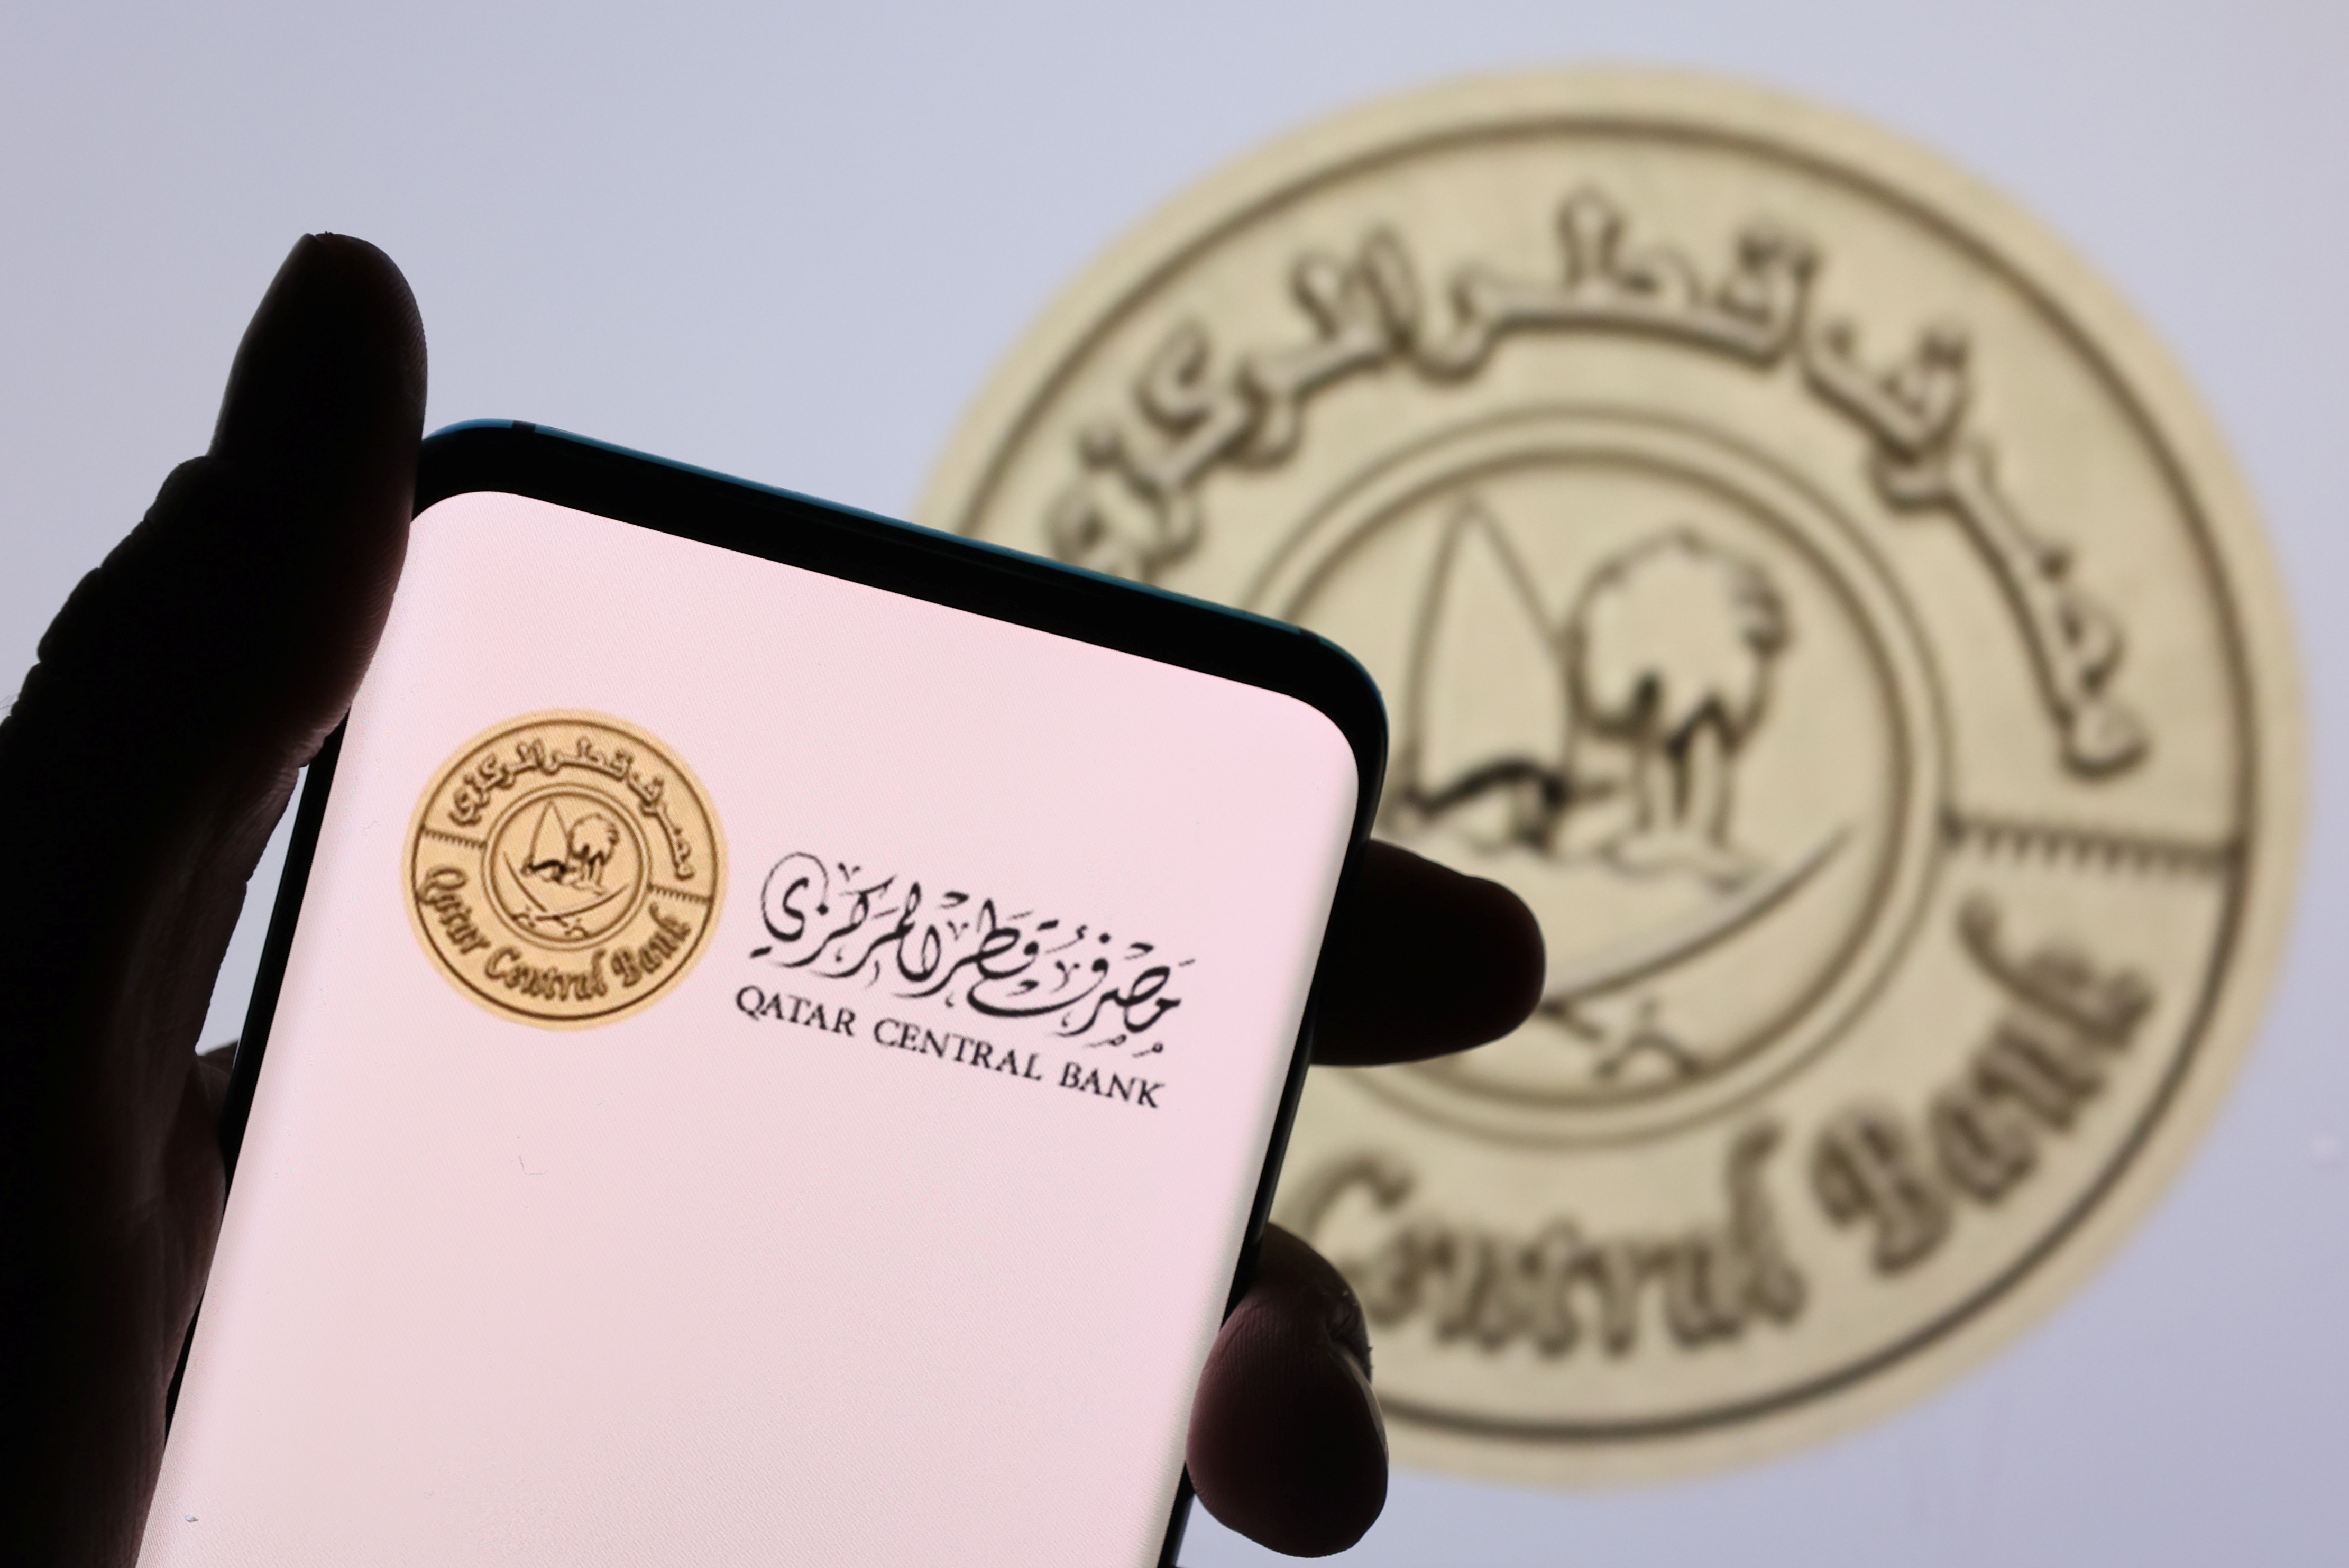 Illustration shows a smartphone with displayed Qatar Central Bank logo